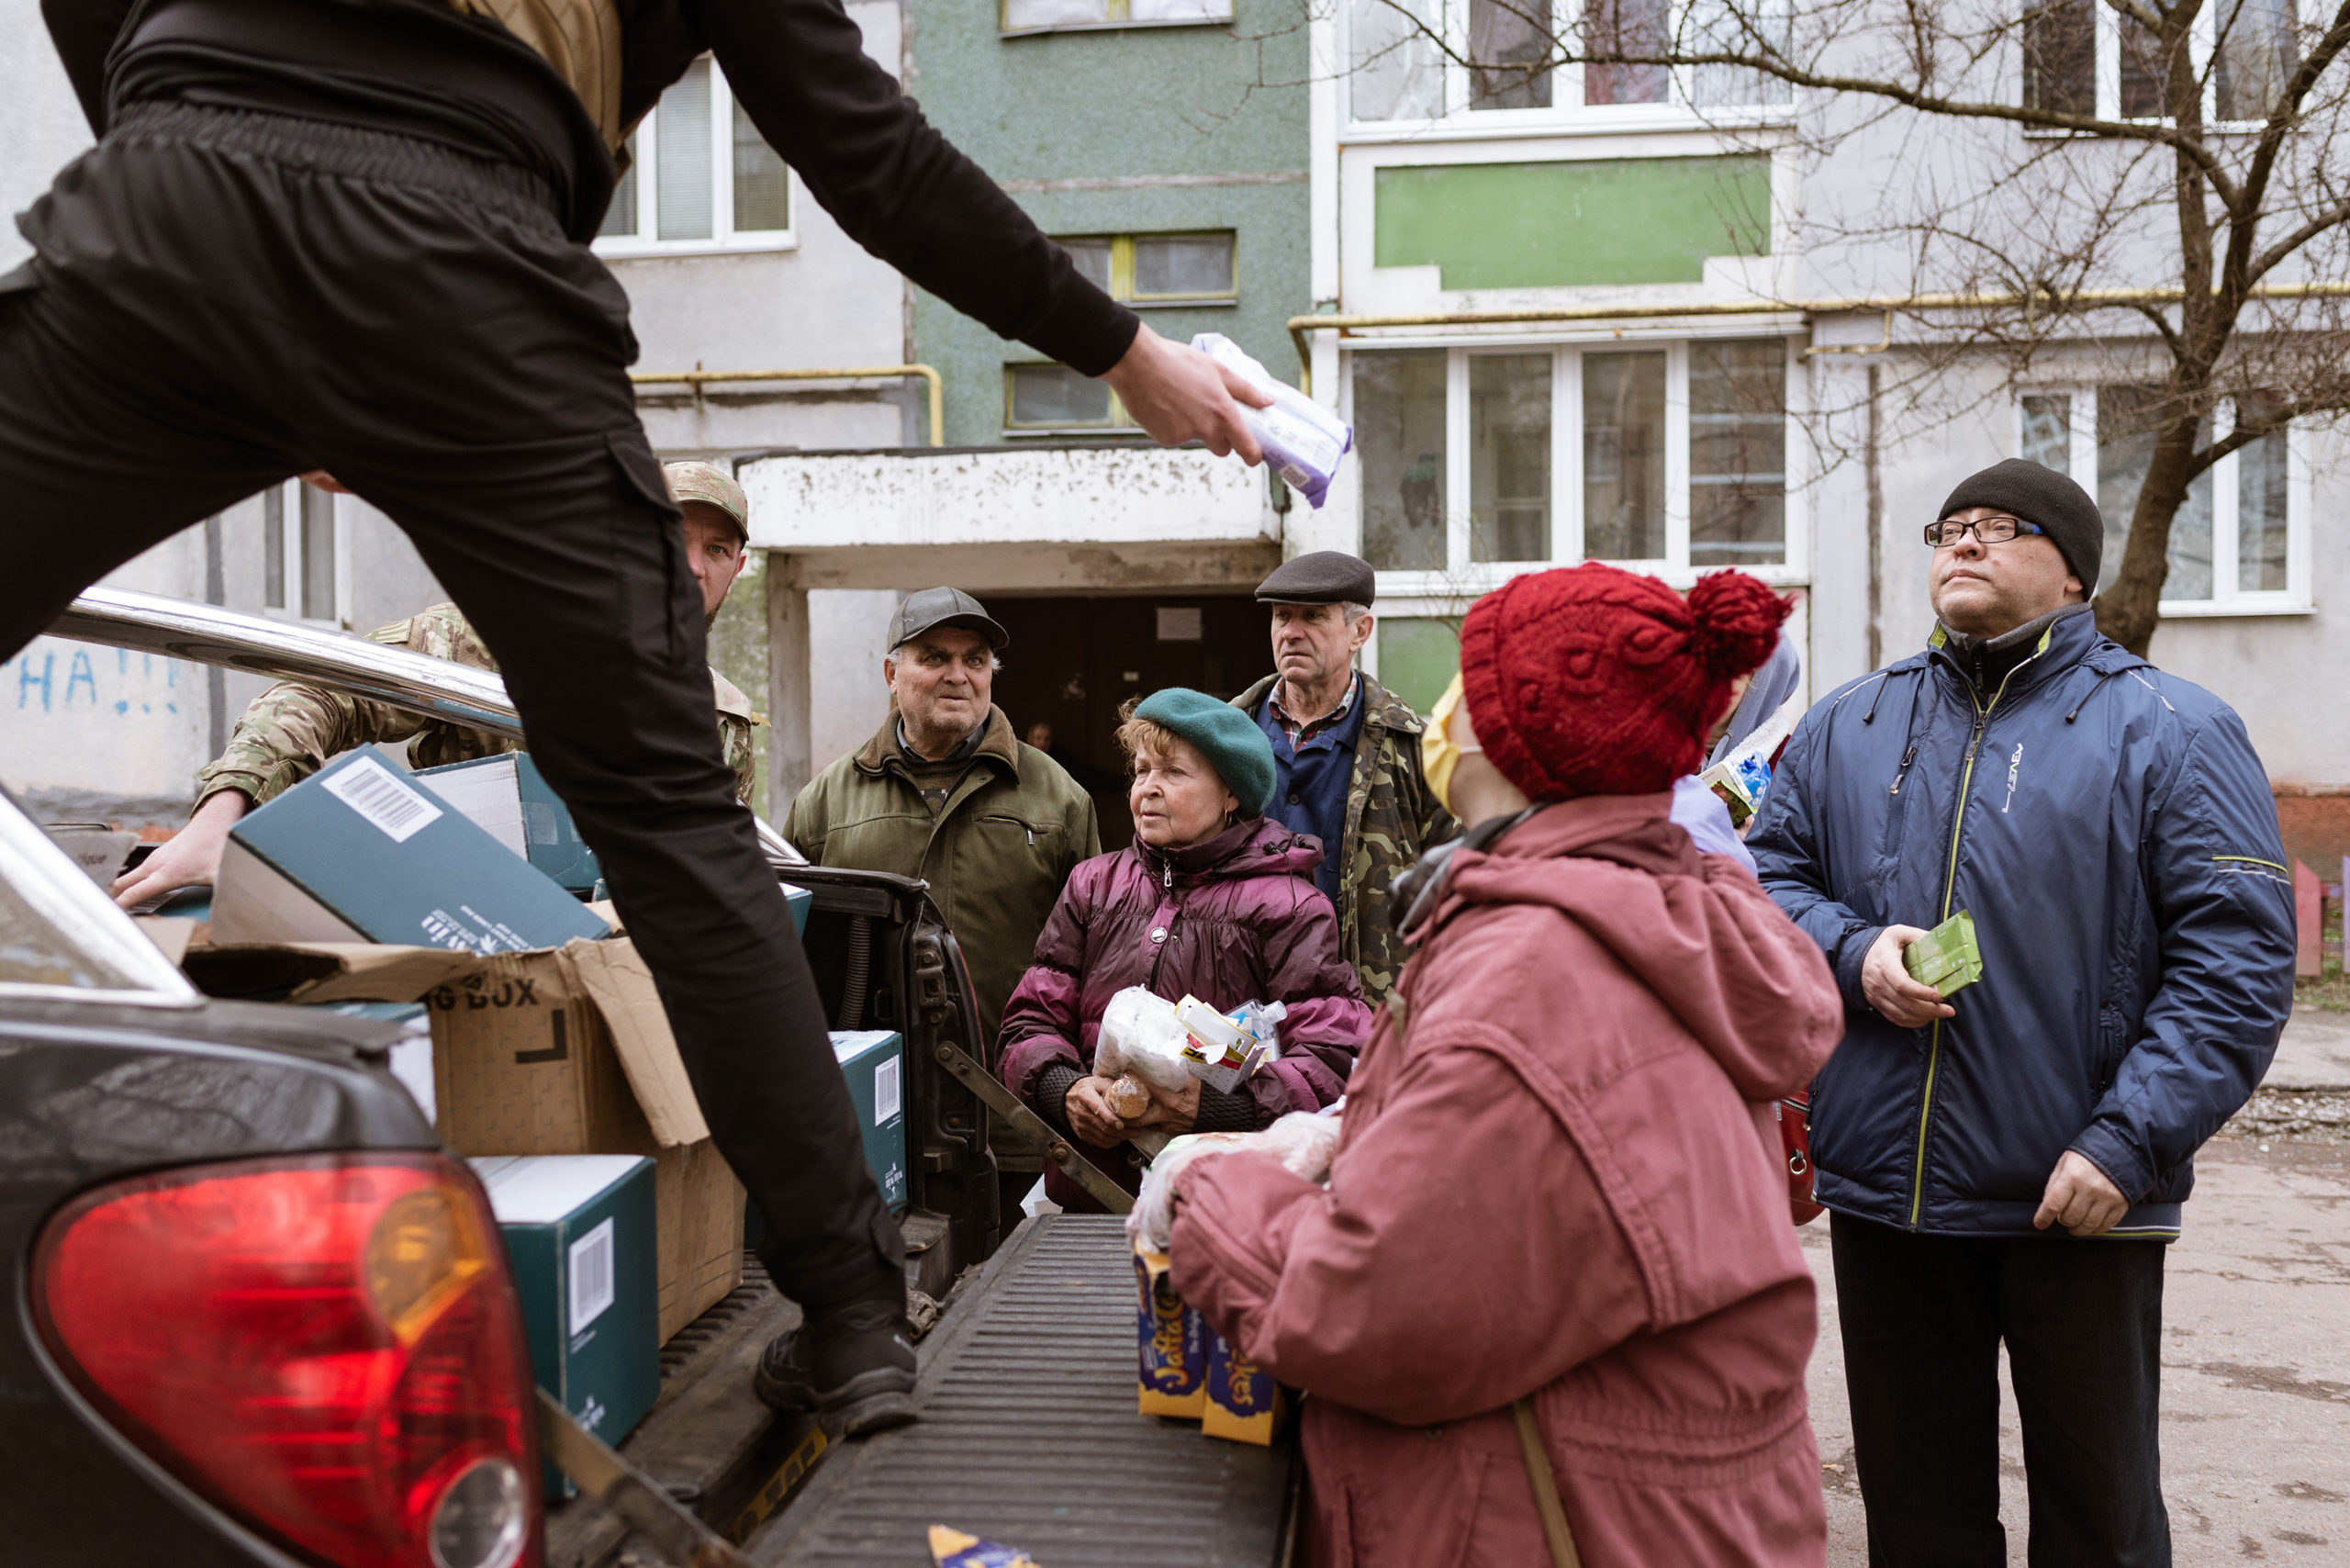 Ukraine has received nearly $900 million in charitable donations as the Ukraine-Russia war continues